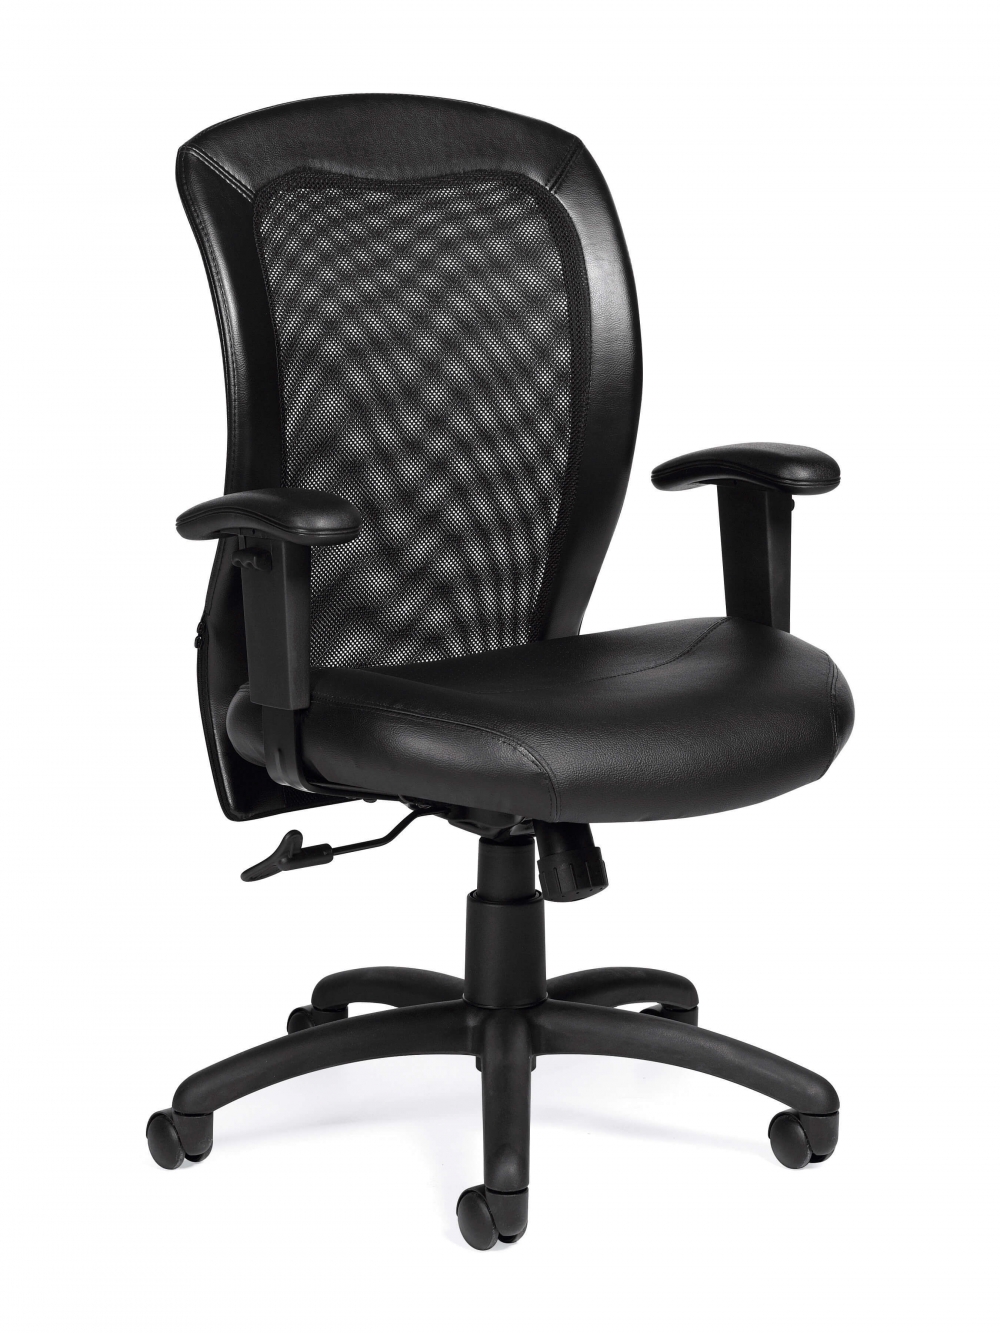 office-furniture-chairs-contemporary-office-chair.jpg